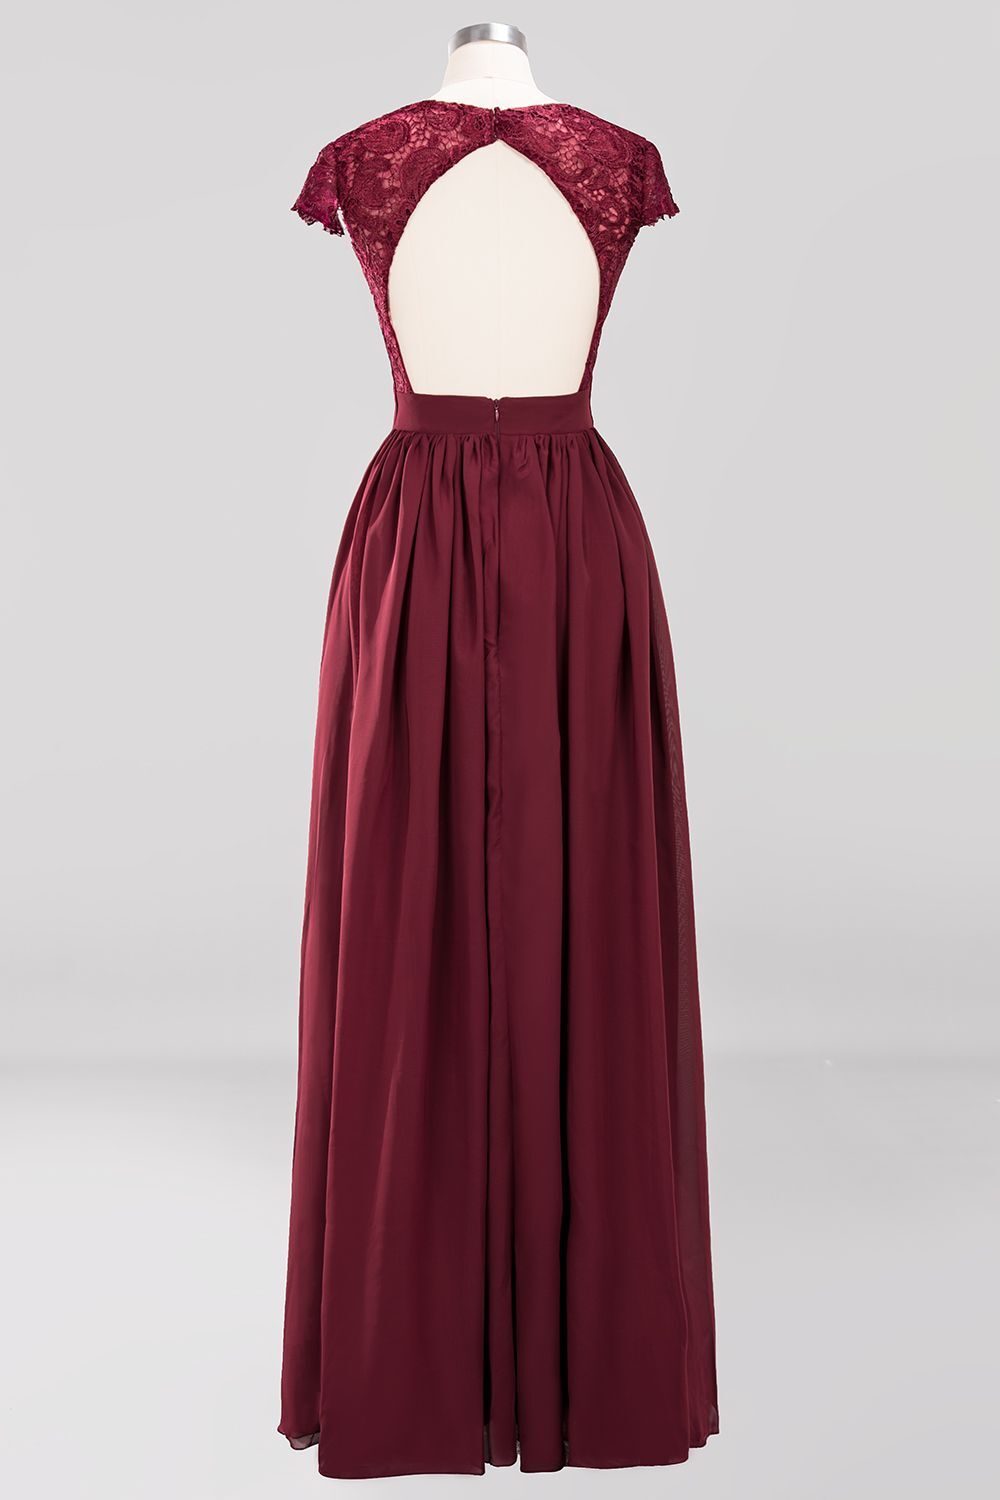 Cap Sleeves Wine Red Lace and Chiffon A-line Long Bridesmaid Dress